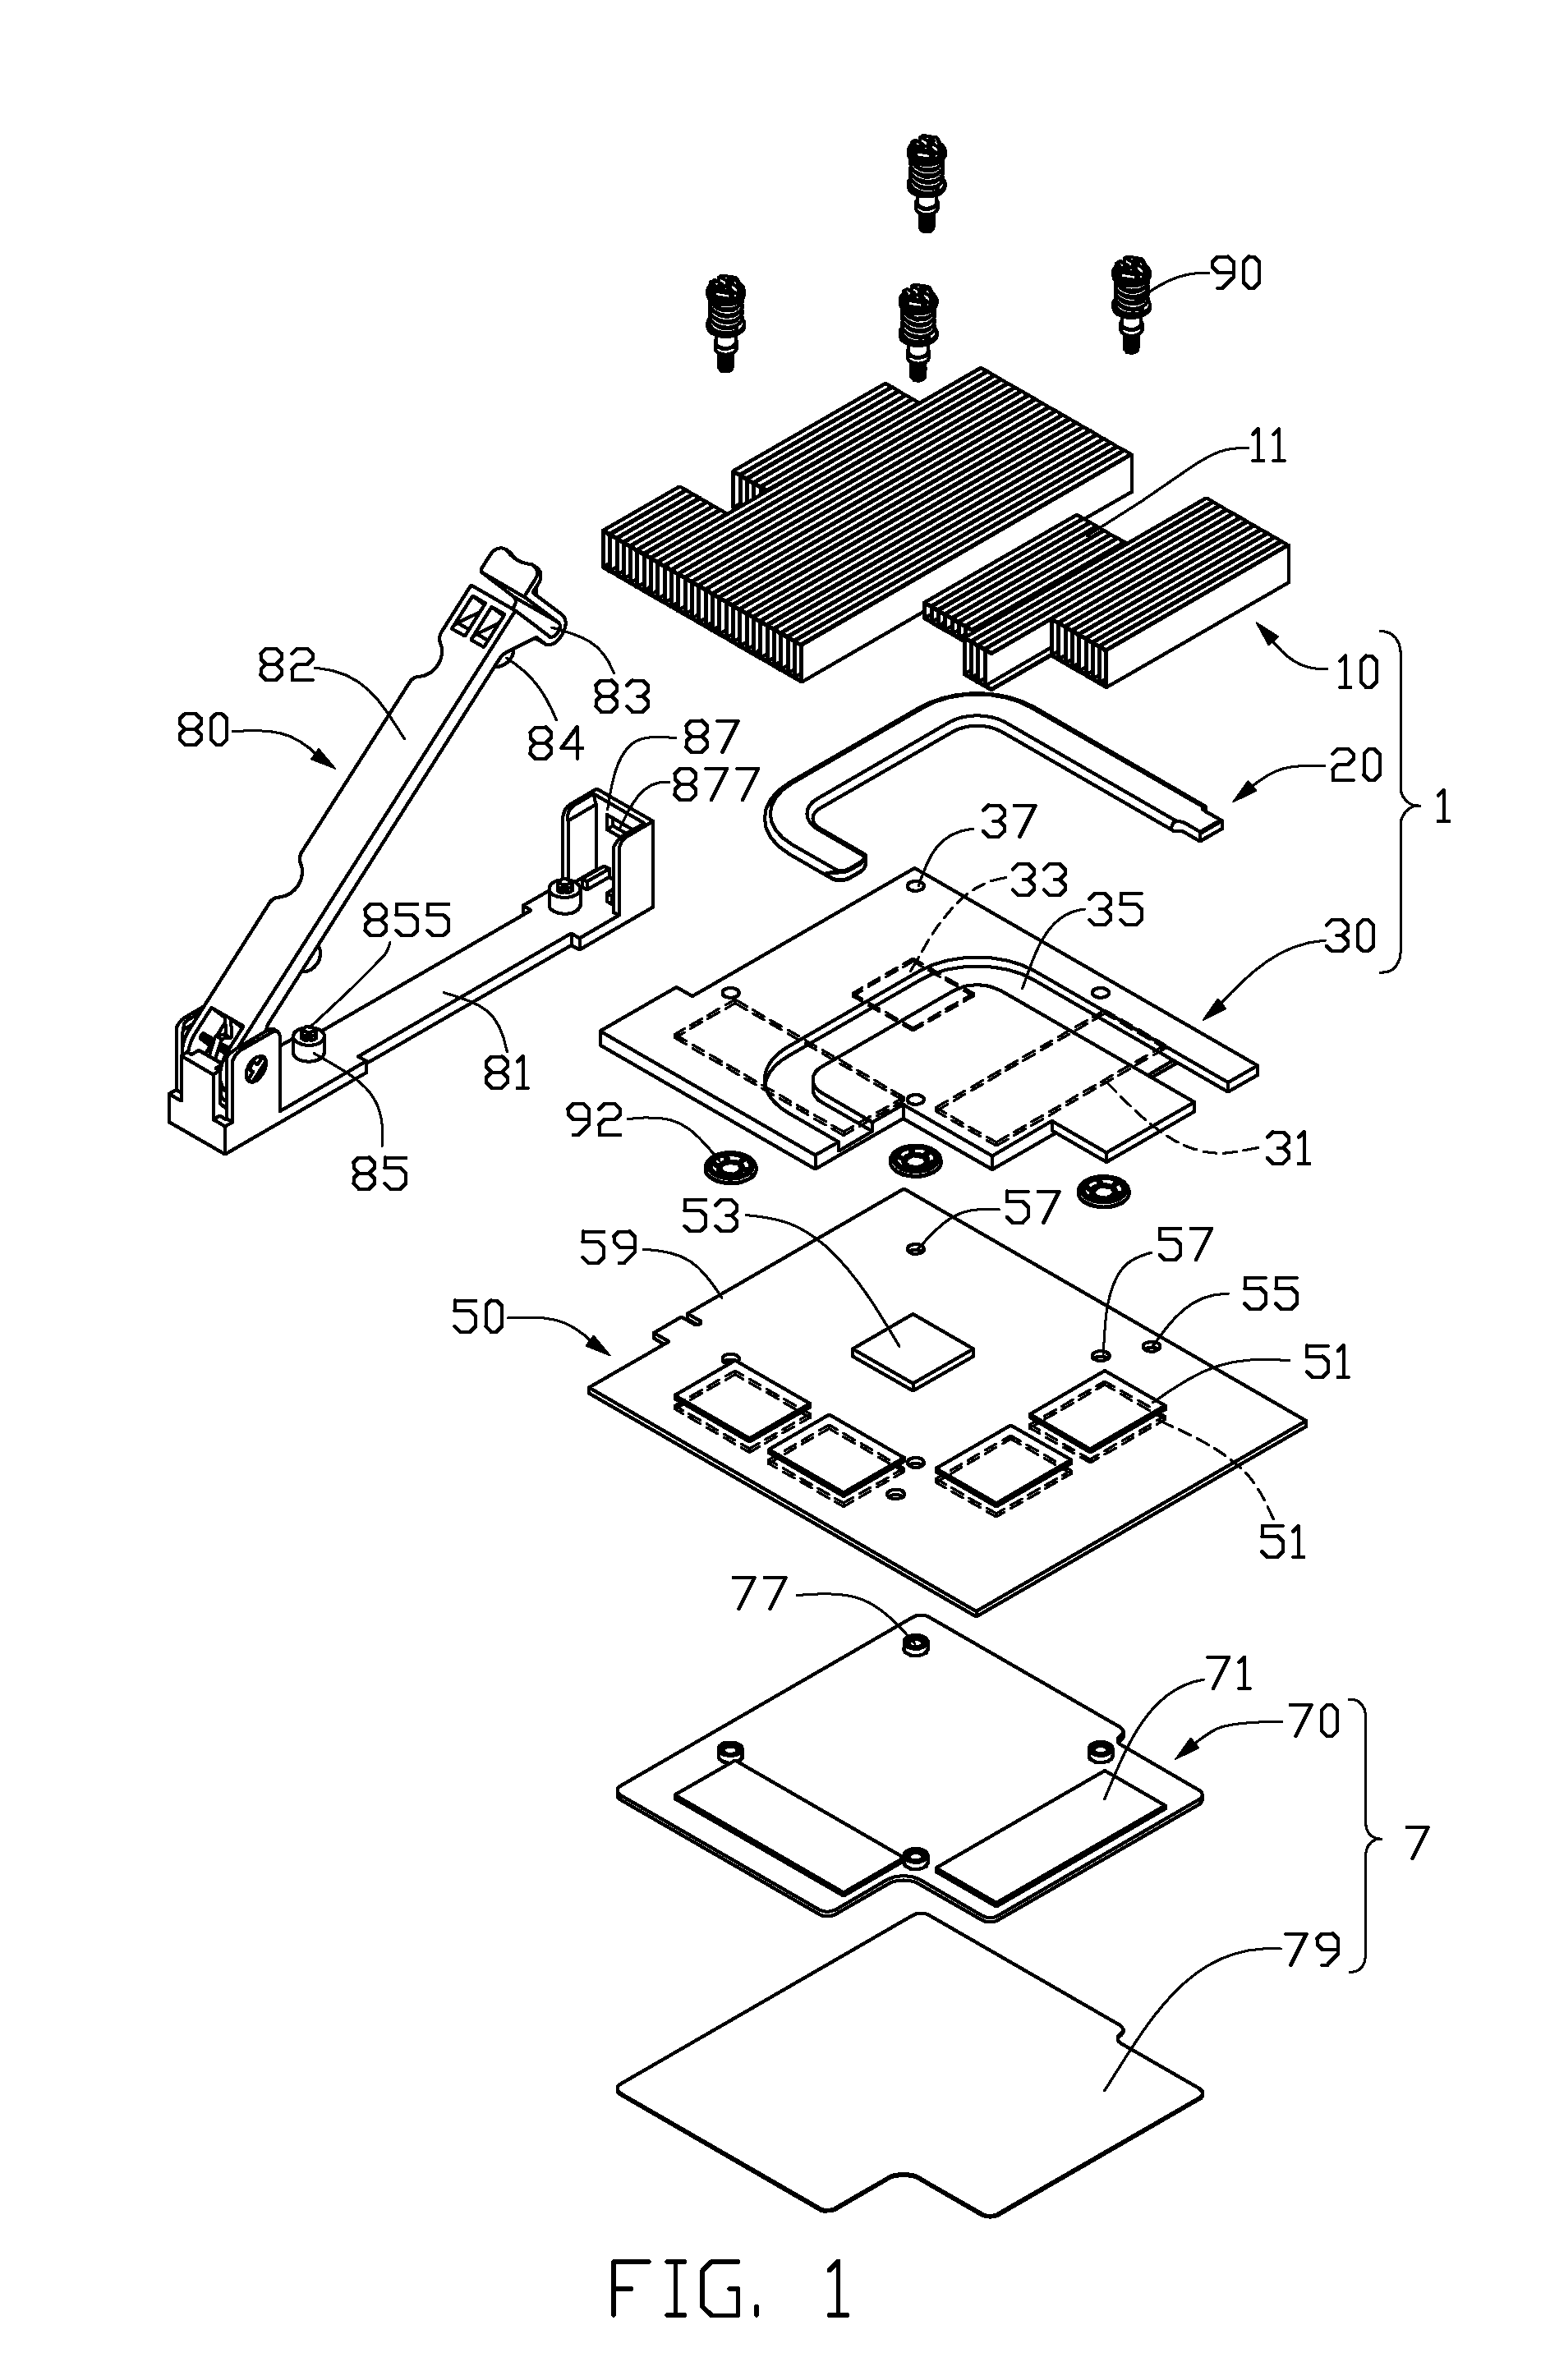 Heat dissipation assembly for graphics card and blade server using the same